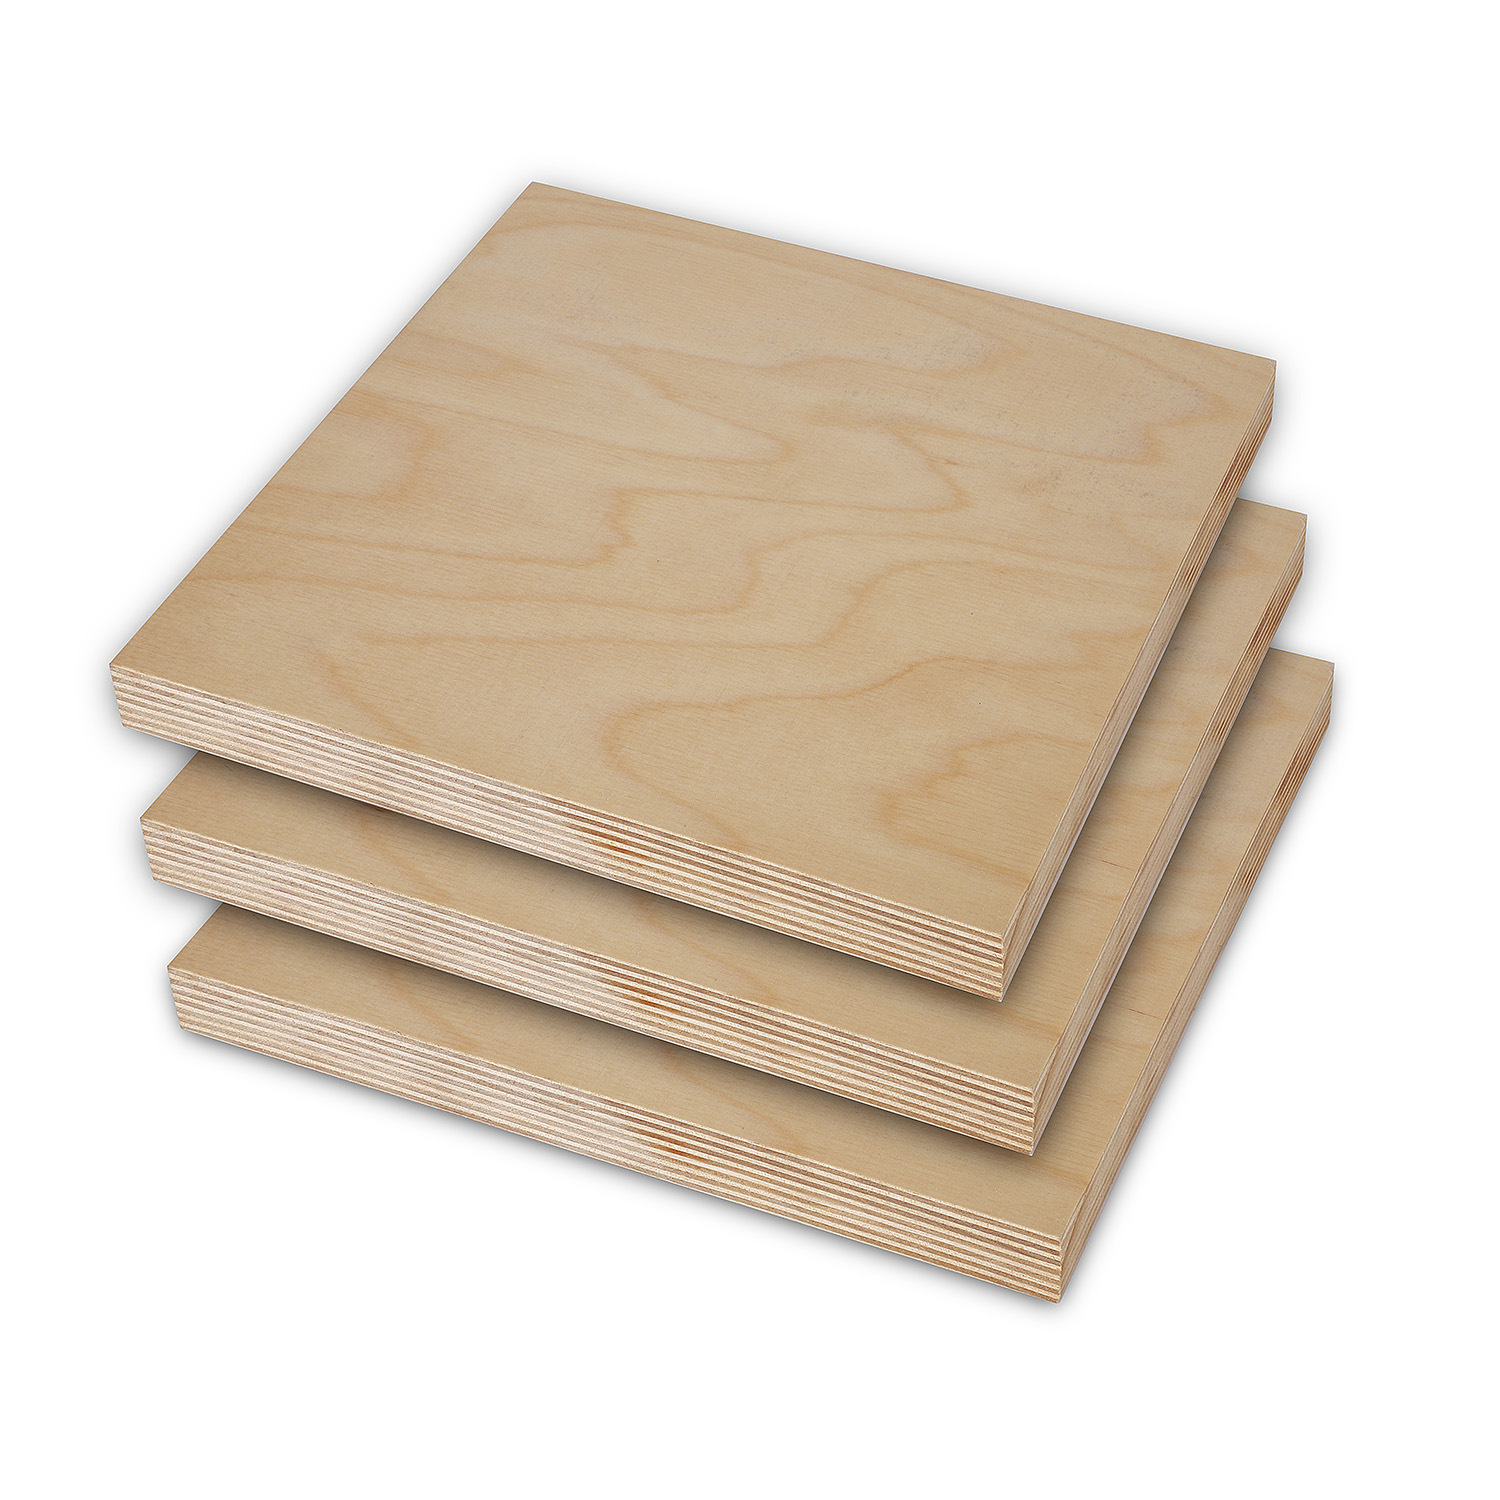 China High Quality Brich Plywood Furniture Material Commercial Board